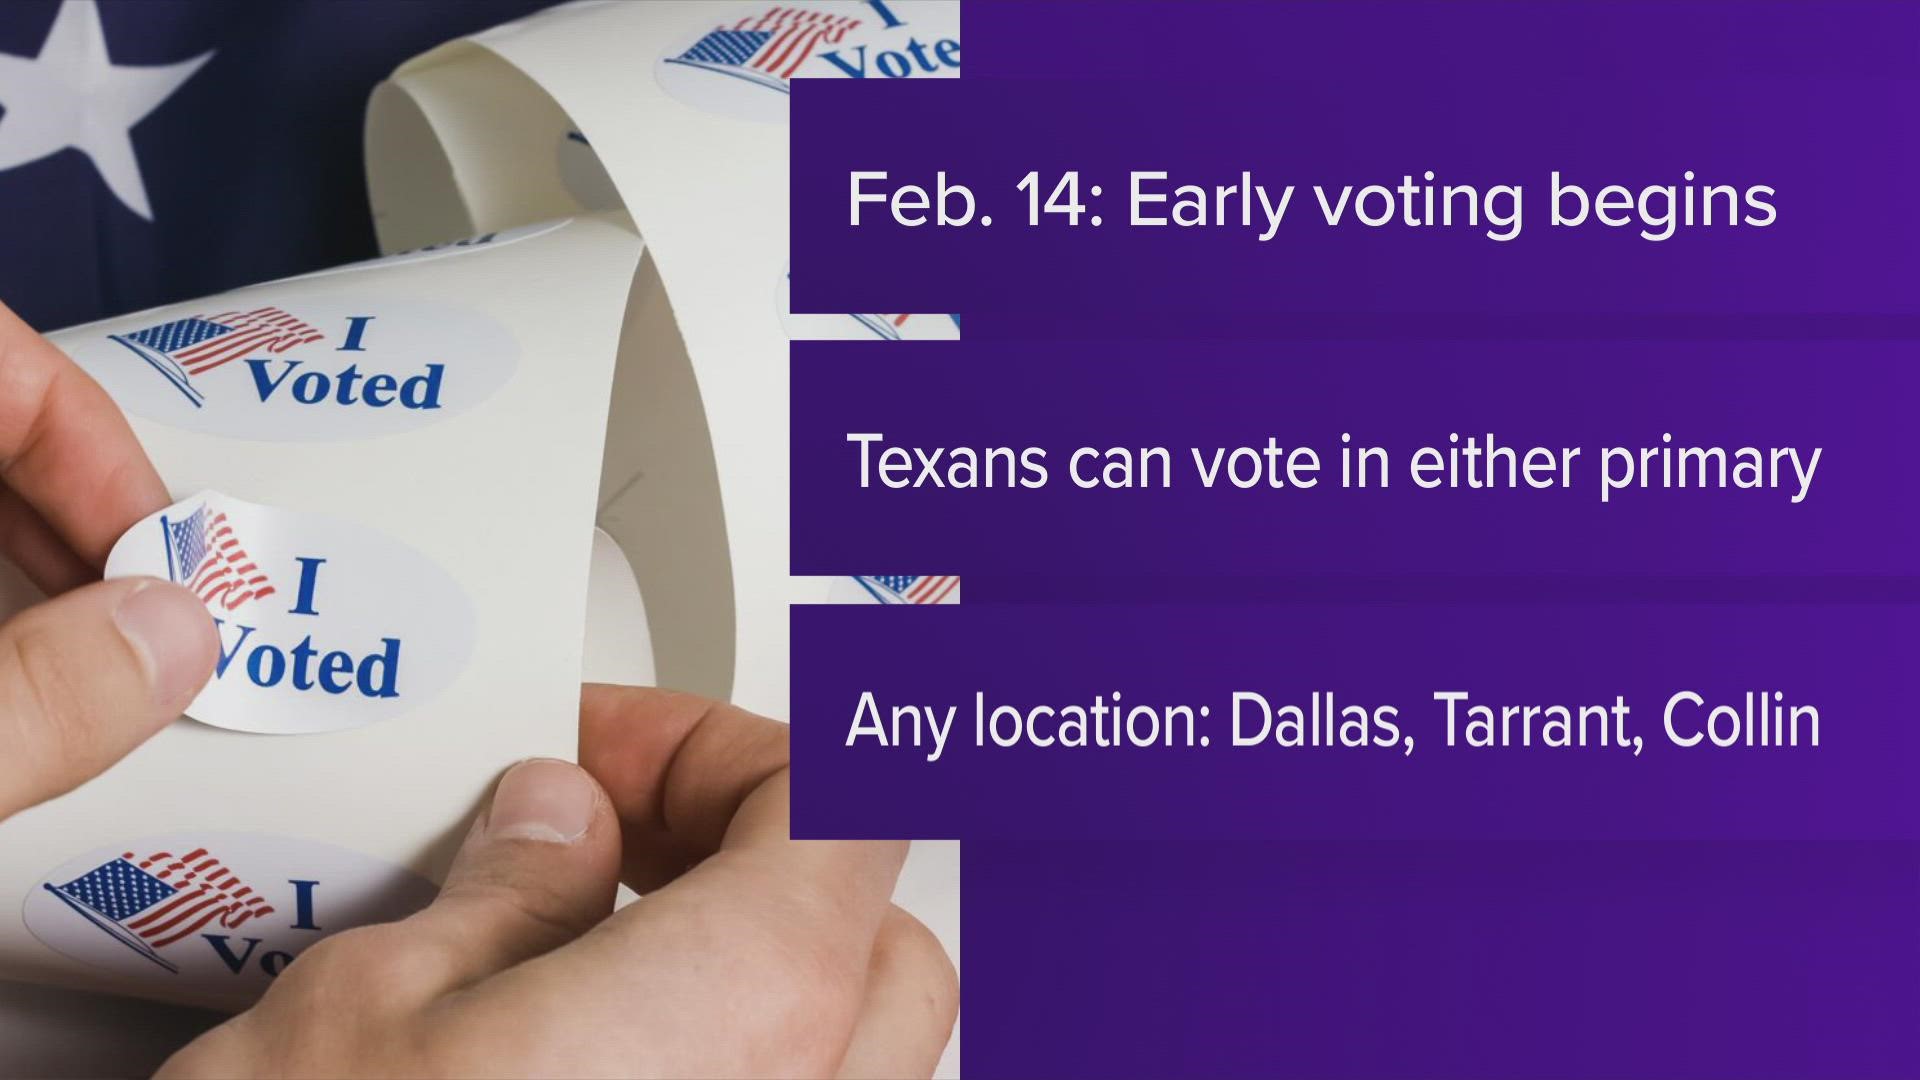 Early voting for the March primaries in Texas begins on February 14.